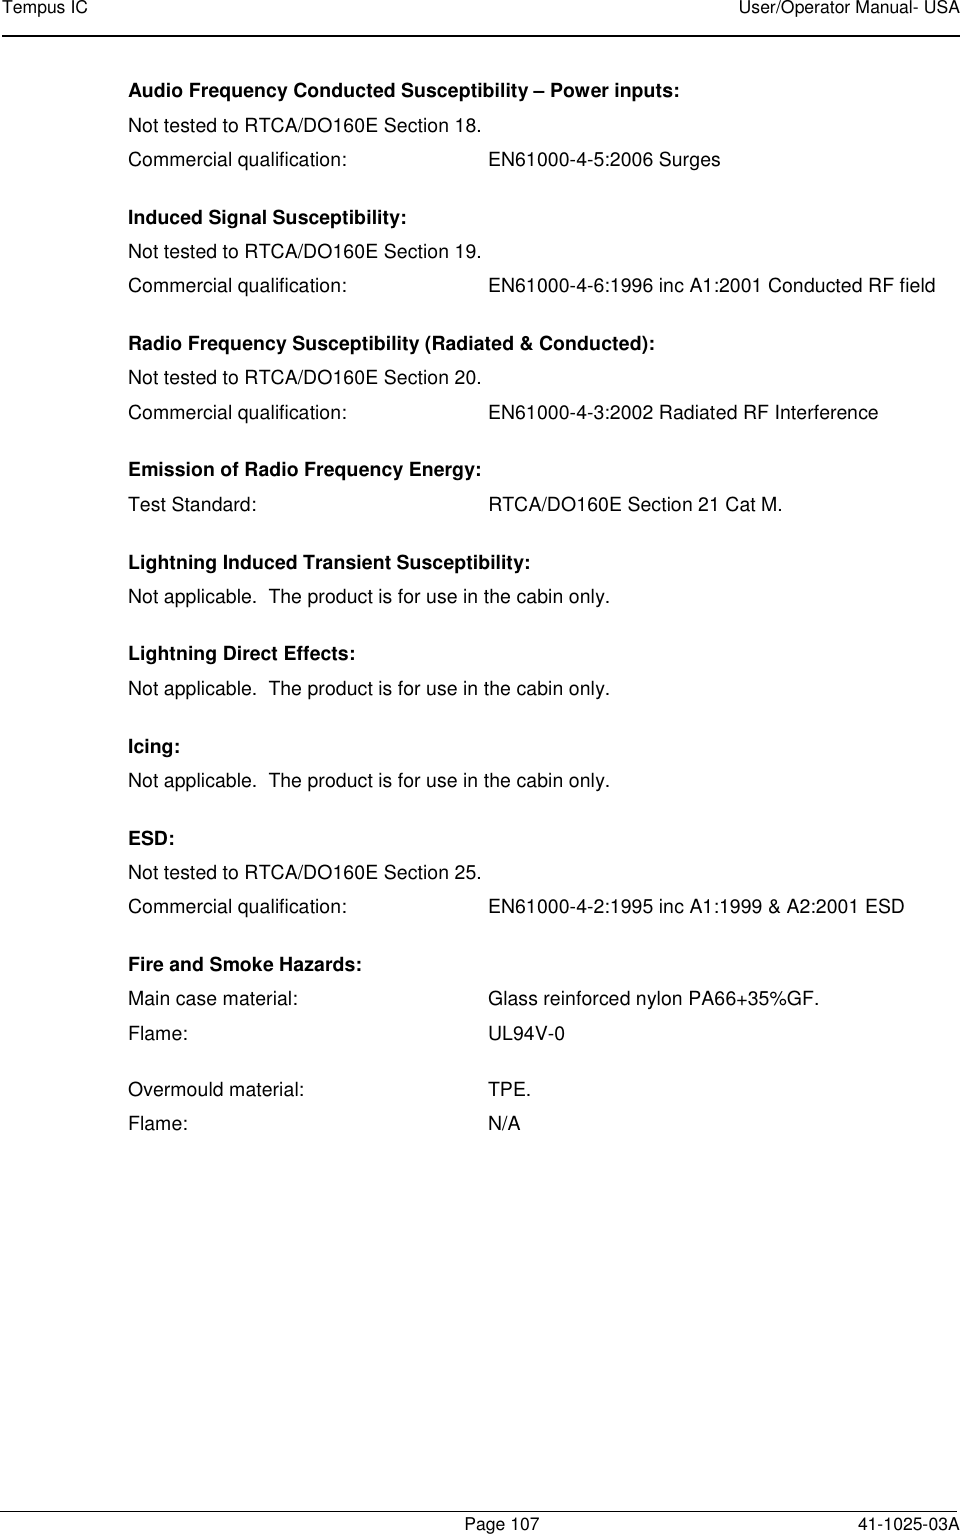 Tempus IC    User/Operator Manual- USA        Page 107   41-1025-03A Audio Frequency Conducted Susceptibility – Power inputs: Not tested to RTCA/DO160E Section 18.   Commercial qualification:    EN61000-4-5:2006 Surges  Induced Signal Susceptibility: Not tested to RTCA/DO160E Section 19.   Commercial qualification:    EN61000-4-6:1996 inc A1:2001 Conducted RF field  Radio Frequency Susceptibility (Radiated &amp; Conducted): Not tested to RTCA/DO160E Section 20.   Commercial qualification:    EN61000-4-3:2002 Radiated RF Interference  Emission of Radio Frequency Energy: Test Standard:  RTCA/DO160E Section 21 Cat M. Lightning Induced Transient Susceptibility: Not applicable.  The product is for use in the cabin only. Lightning Direct Effects: Not applicable.  The product is for use in the cabin only. Icing: Not applicable.  The product is for use in the cabin only. ESD: Not tested to RTCA/DO160E Section 25.   Commercial qualification:    EN61000-4-2:1995 inc A1:1999 &amp; A2:2001 ESD  Fire and Smoke Hazards: Main case material:  Glass reinforced nylon PA66+35%GF. Flame:  UL94V-0  Overmould material:  TPE. Flame:  N/A 